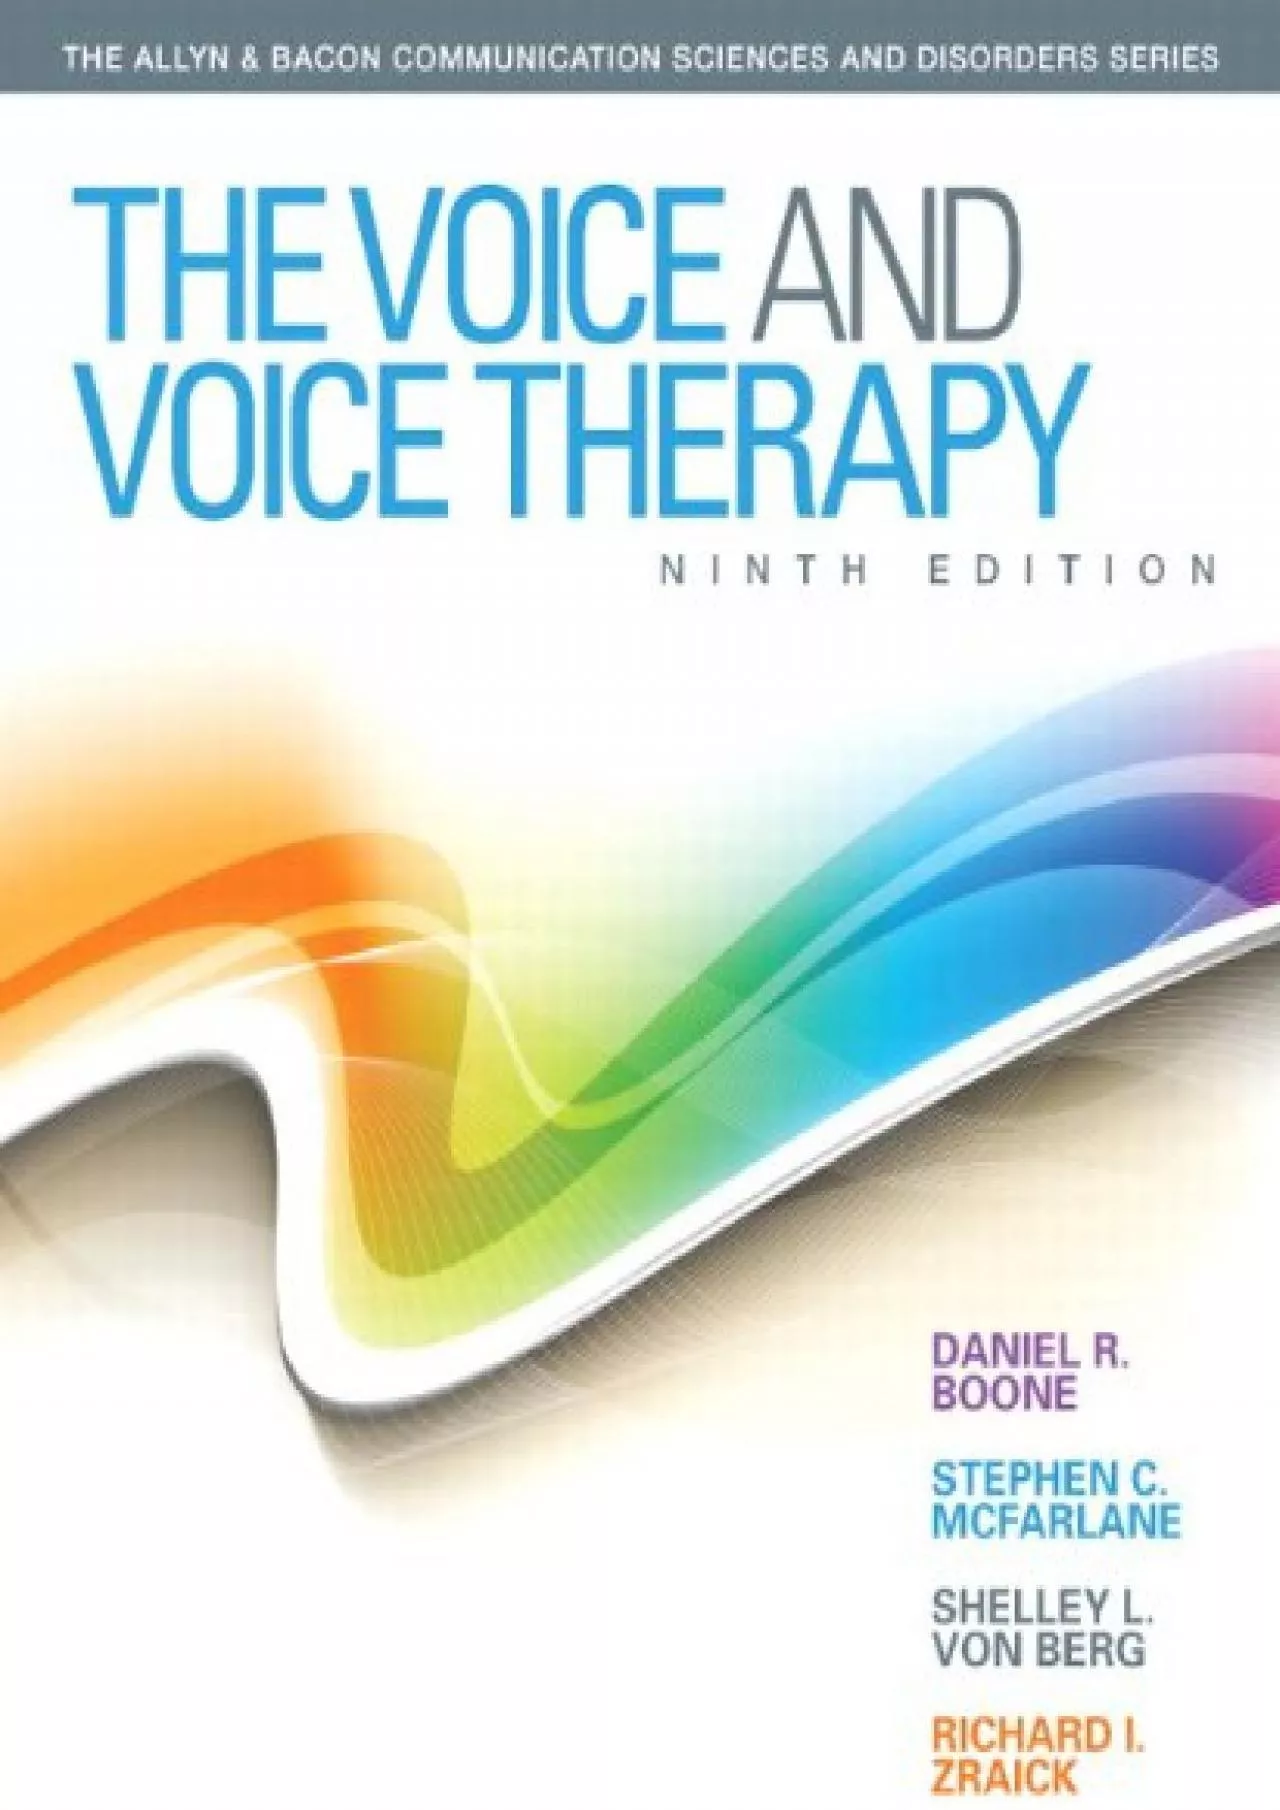 (READ)-The Voice and Voice Therapy (9th Edition) (Allyn & Bacon Communication Sciences